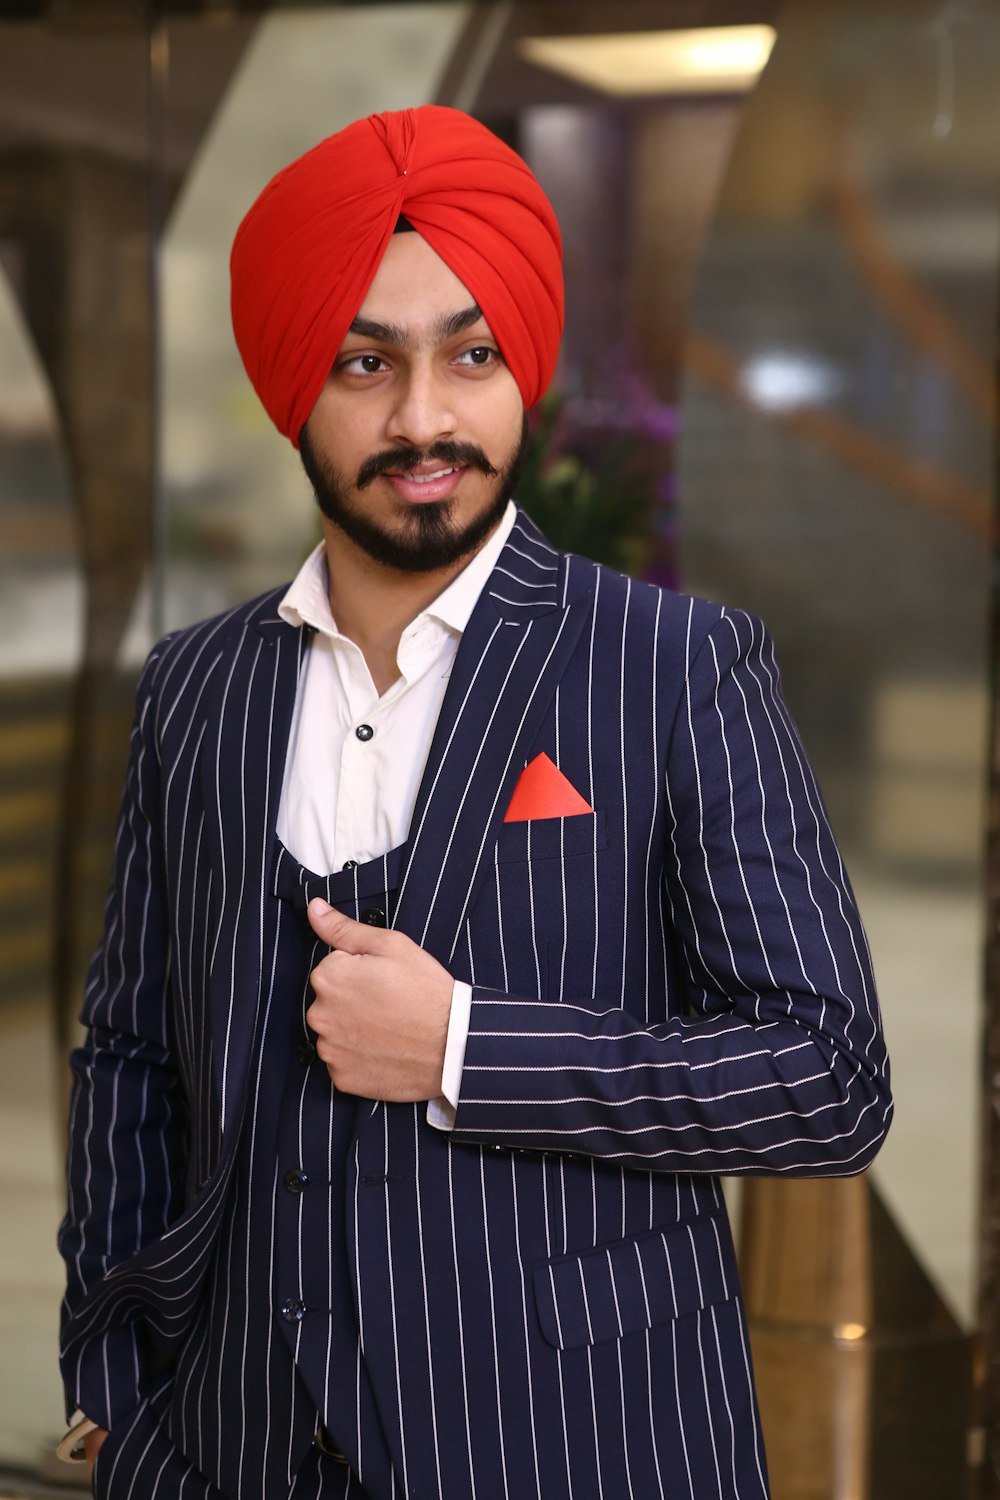 Man in black and white striped suit jacket wearing red knit cap photo –  Free Red turban Image on Unsplash